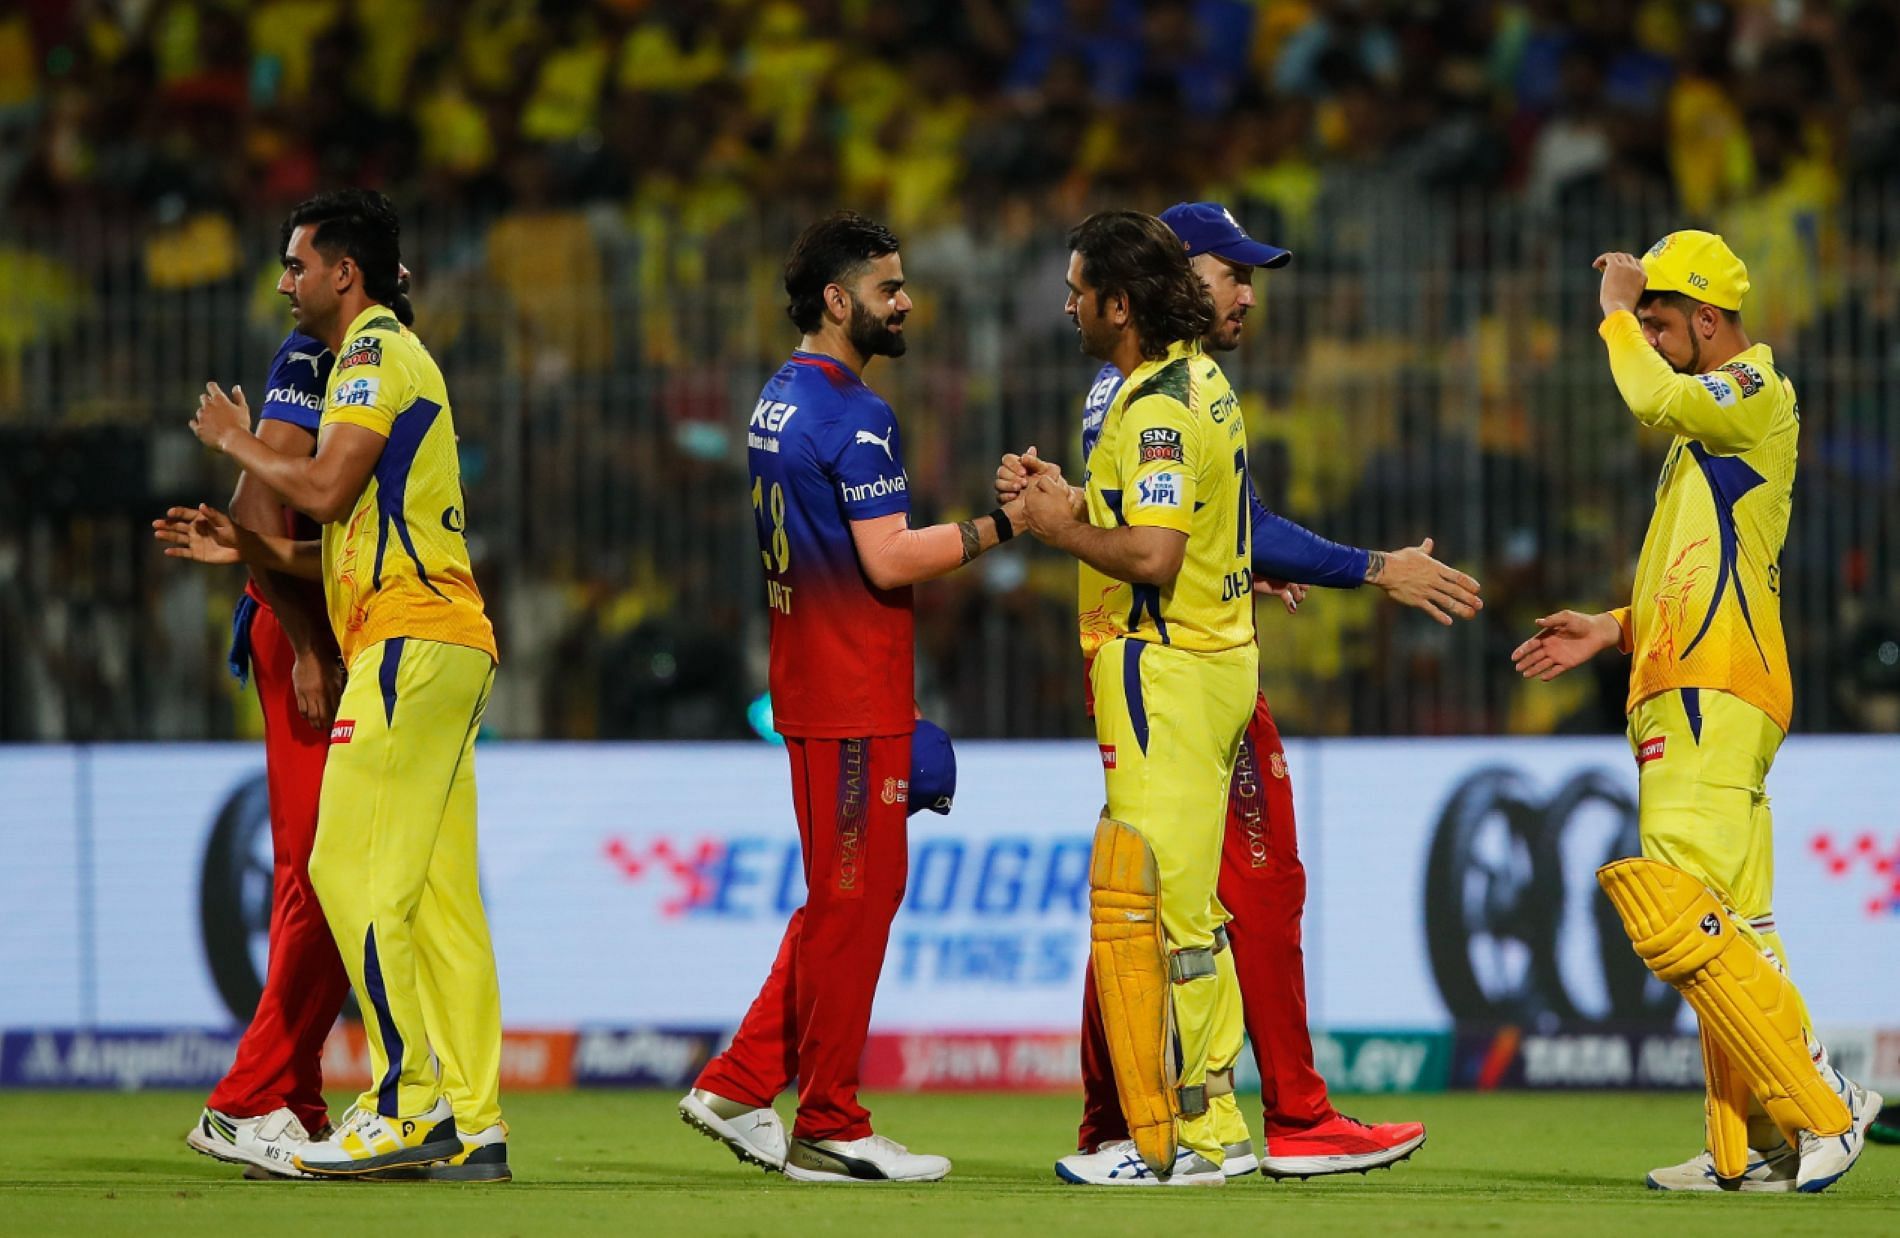 The clash lived up to its billing before an all-too-familiar finish [ Credits : IPL Twitter handle]